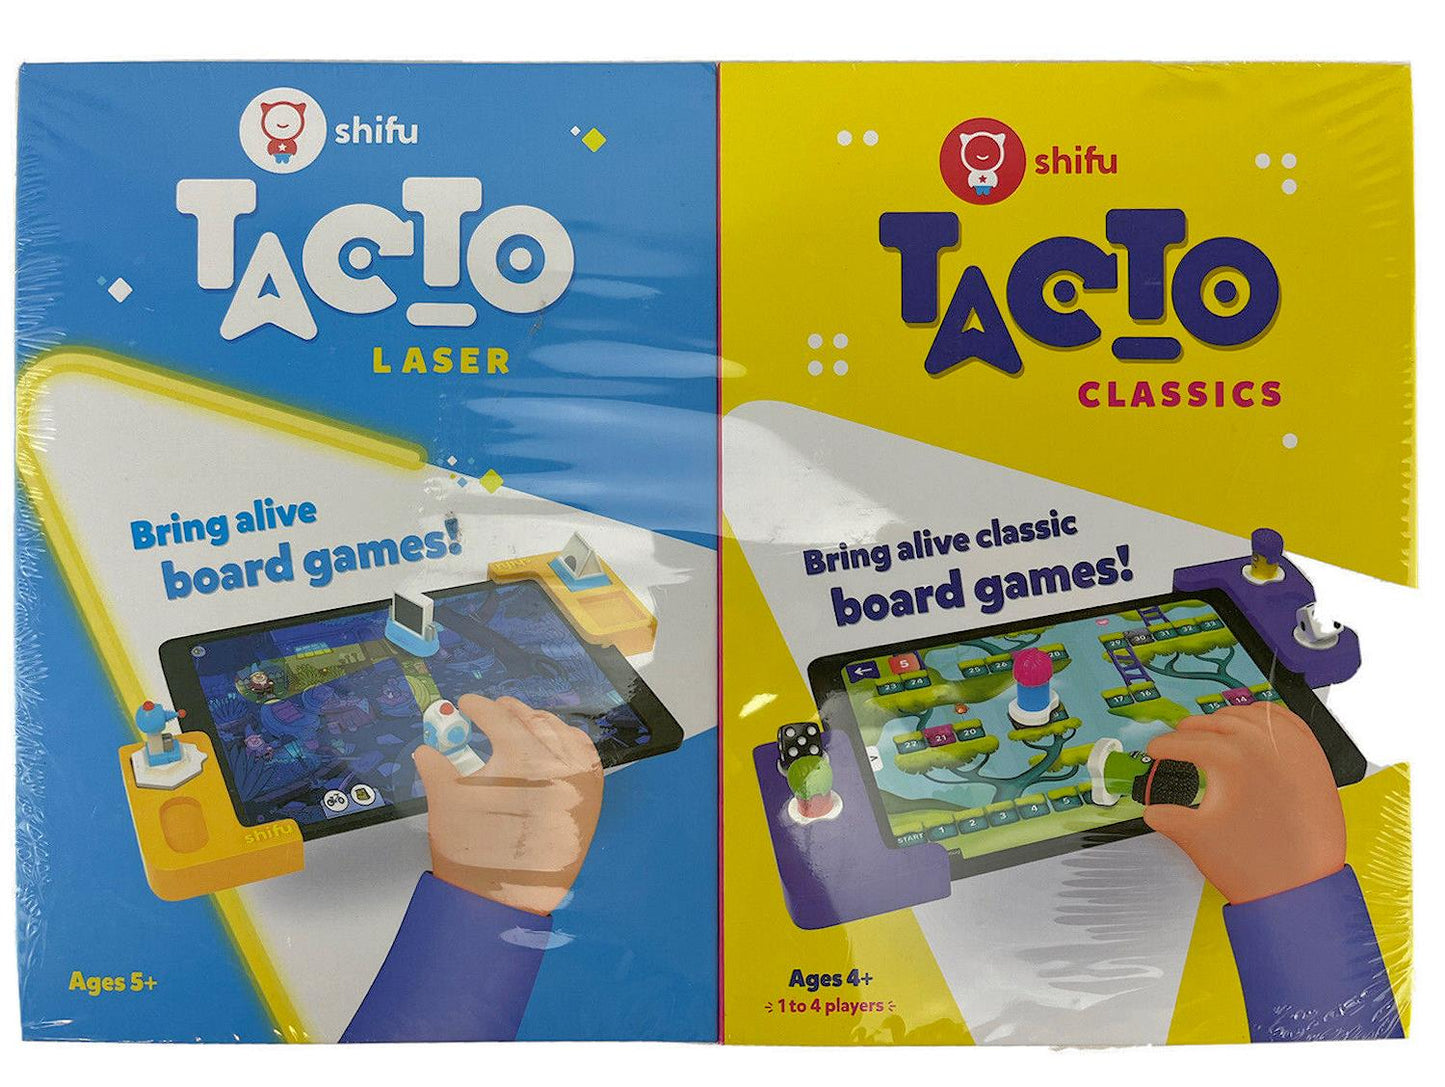 Shifu TacTo 2-in-1 combo Laser+Classics Board Games - Tablet Not Included